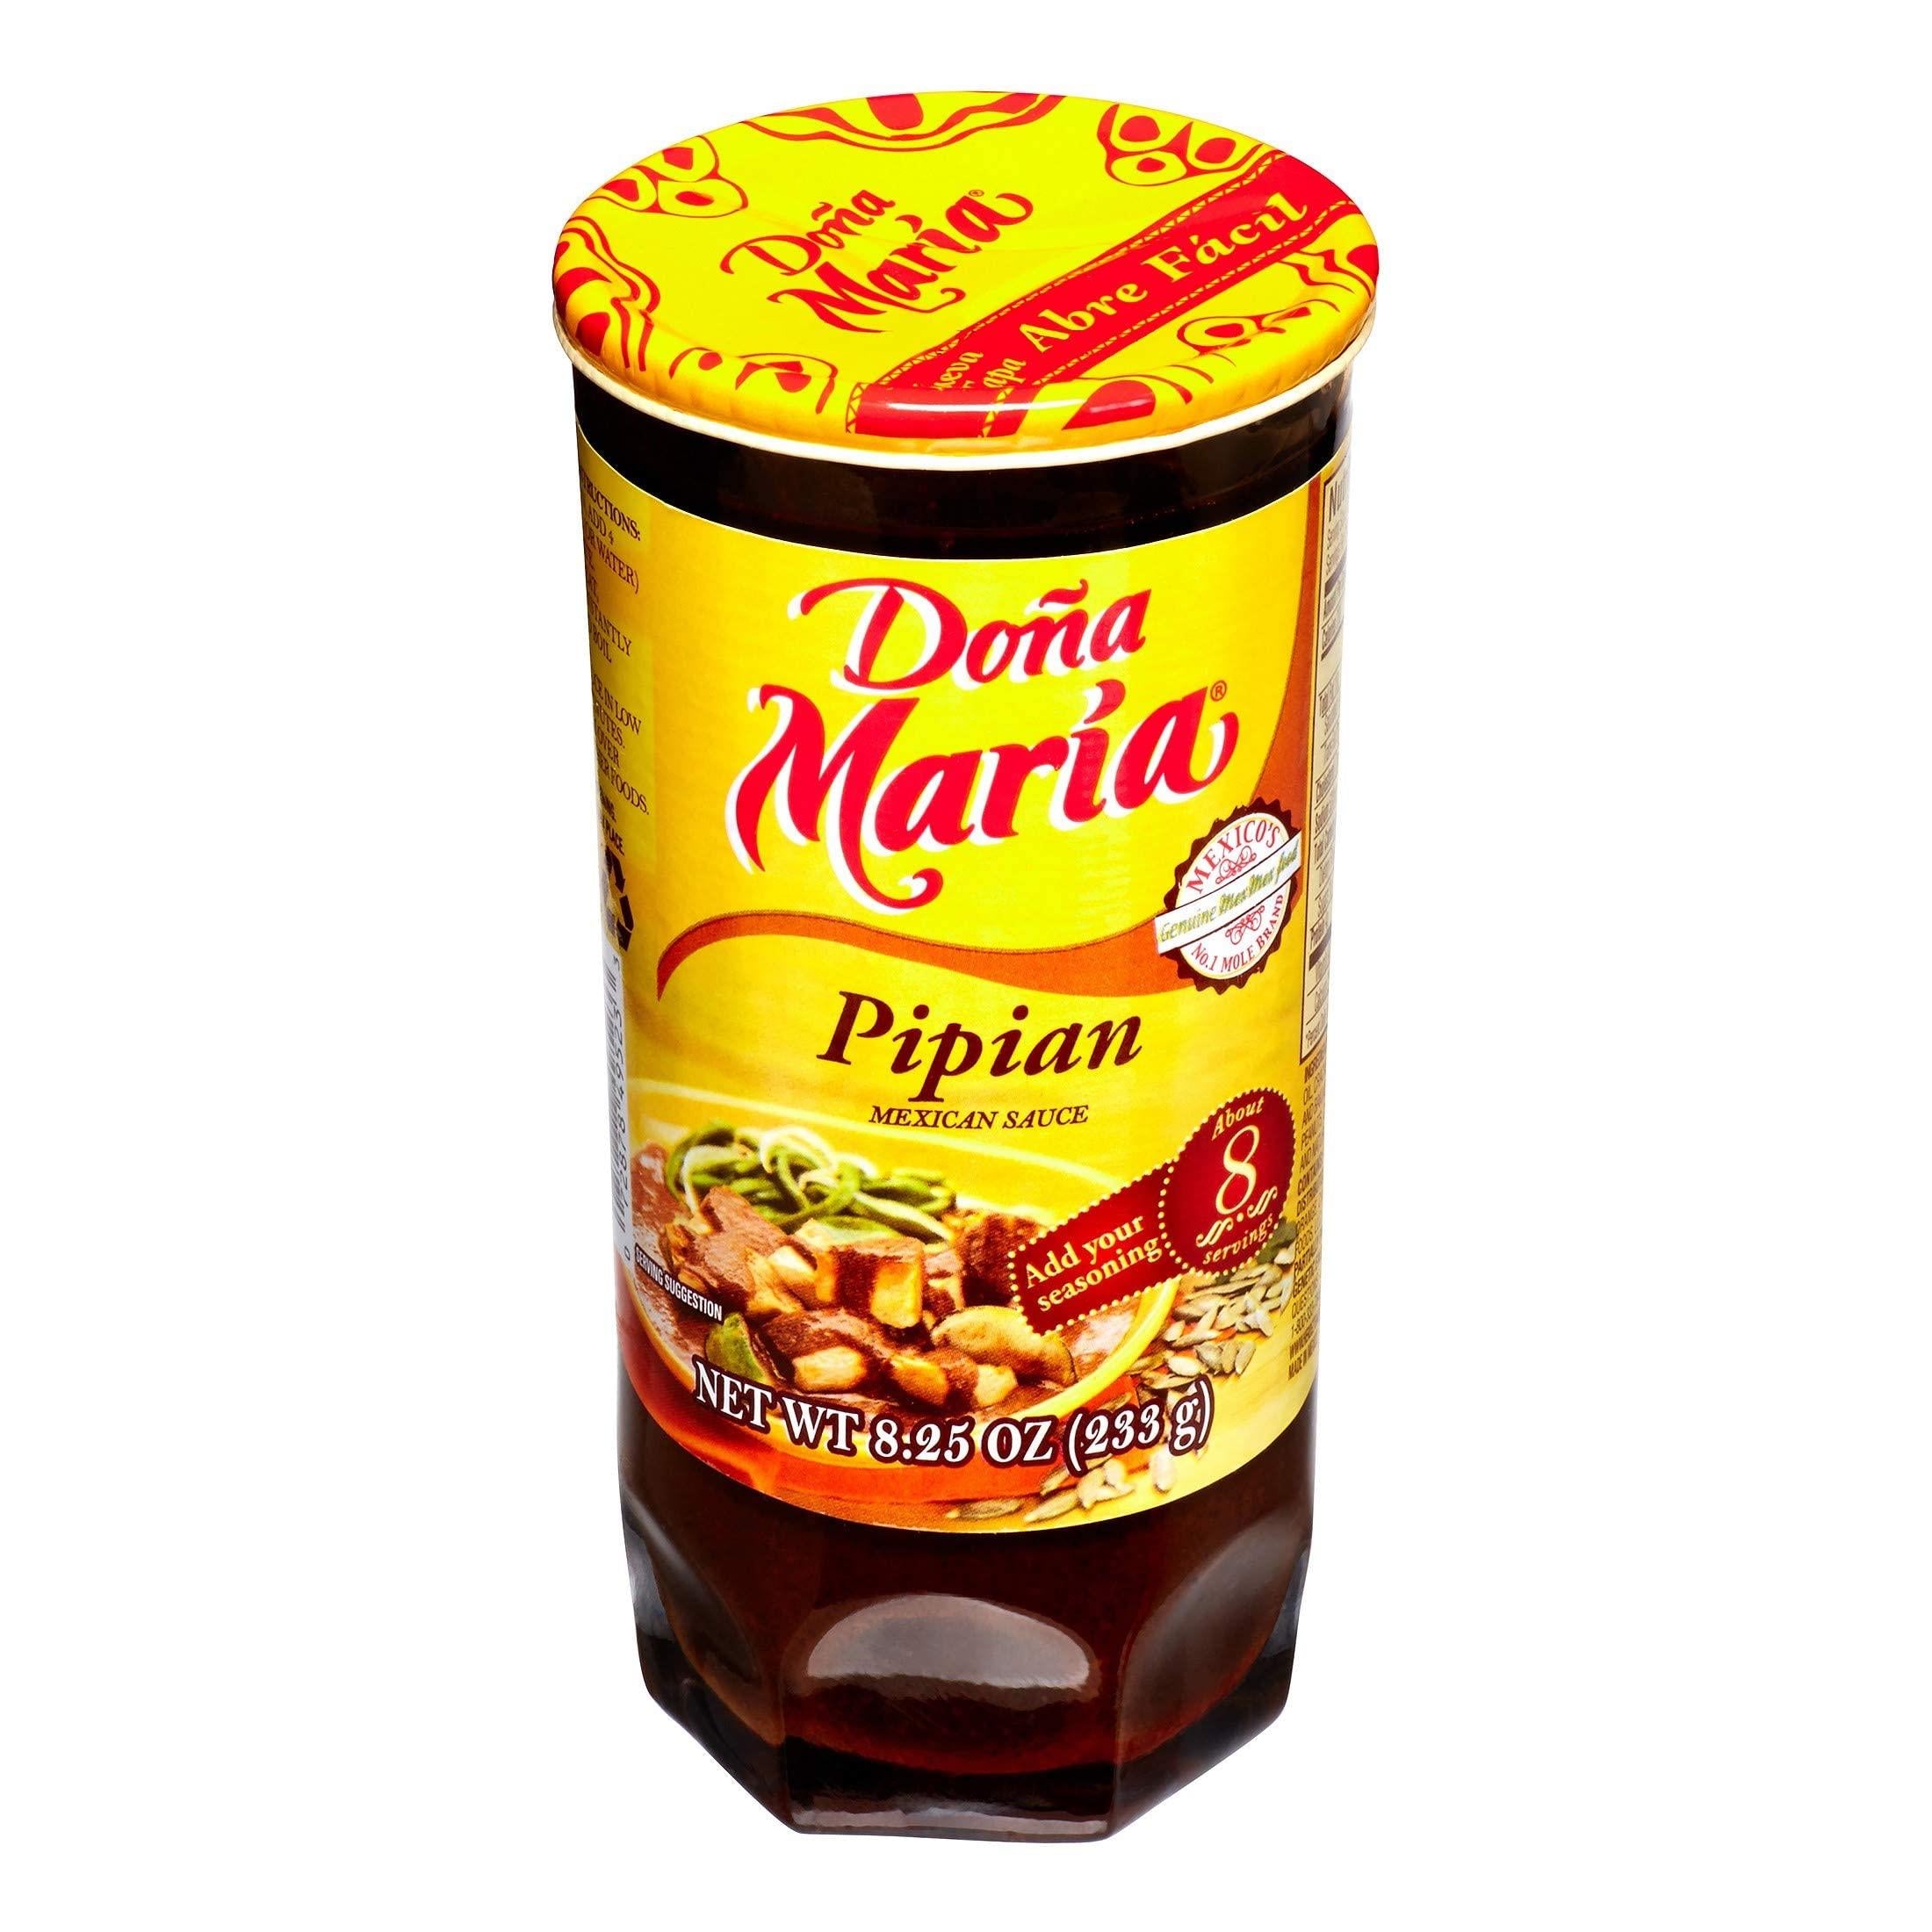 Dona Maria Mole Mexican Sauce 8.25oz Imported from Mexico (Pipian, 2 Pack)